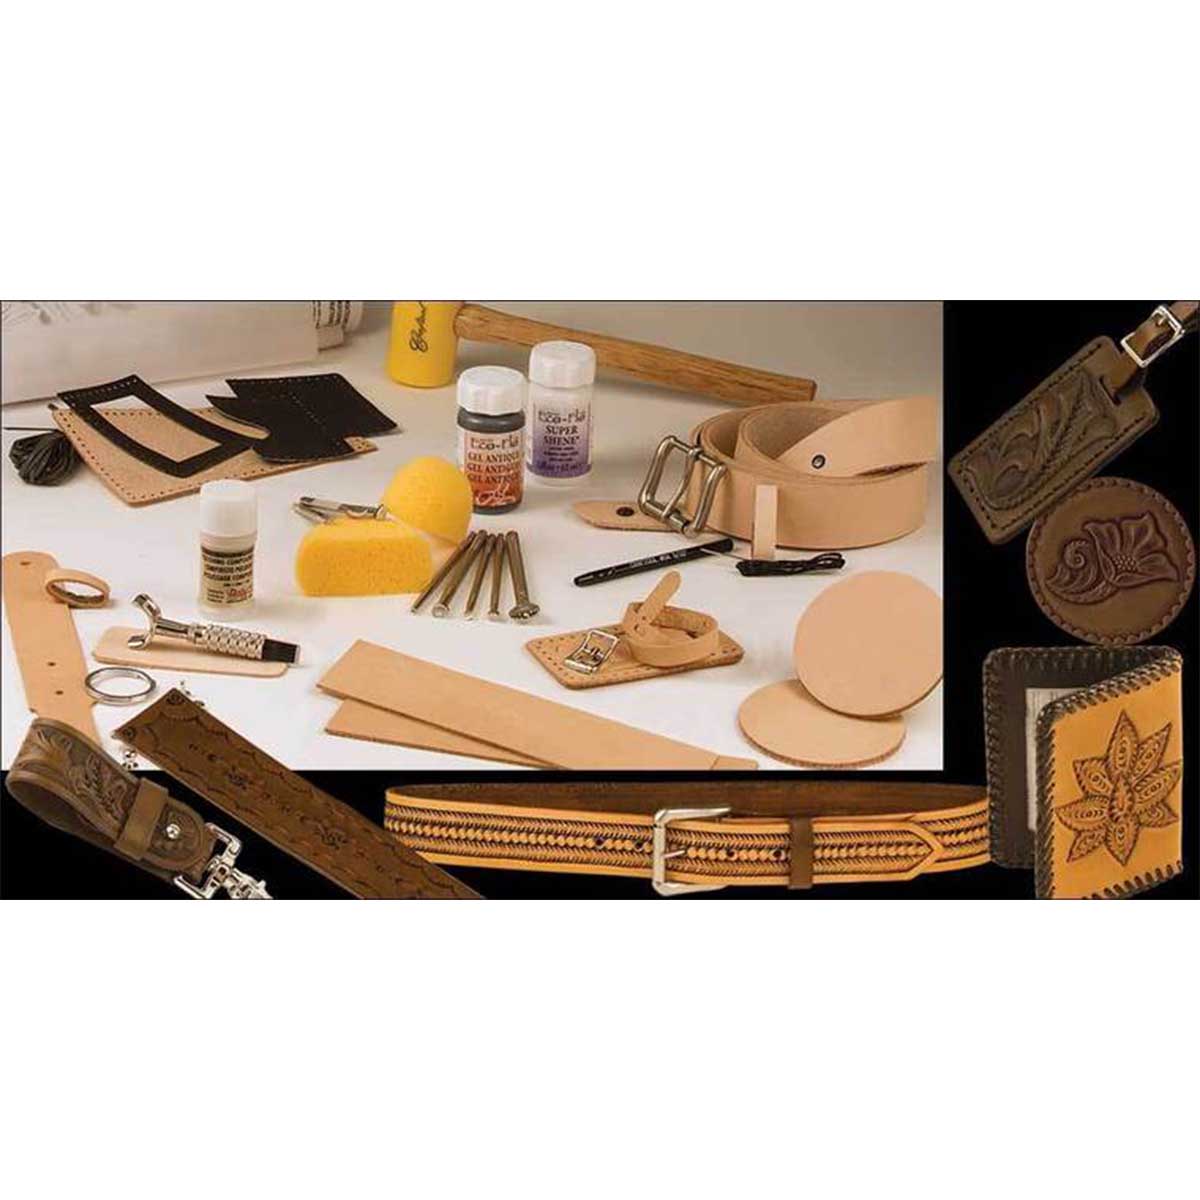 Kit complet "DELUXE CARVING" - 55402